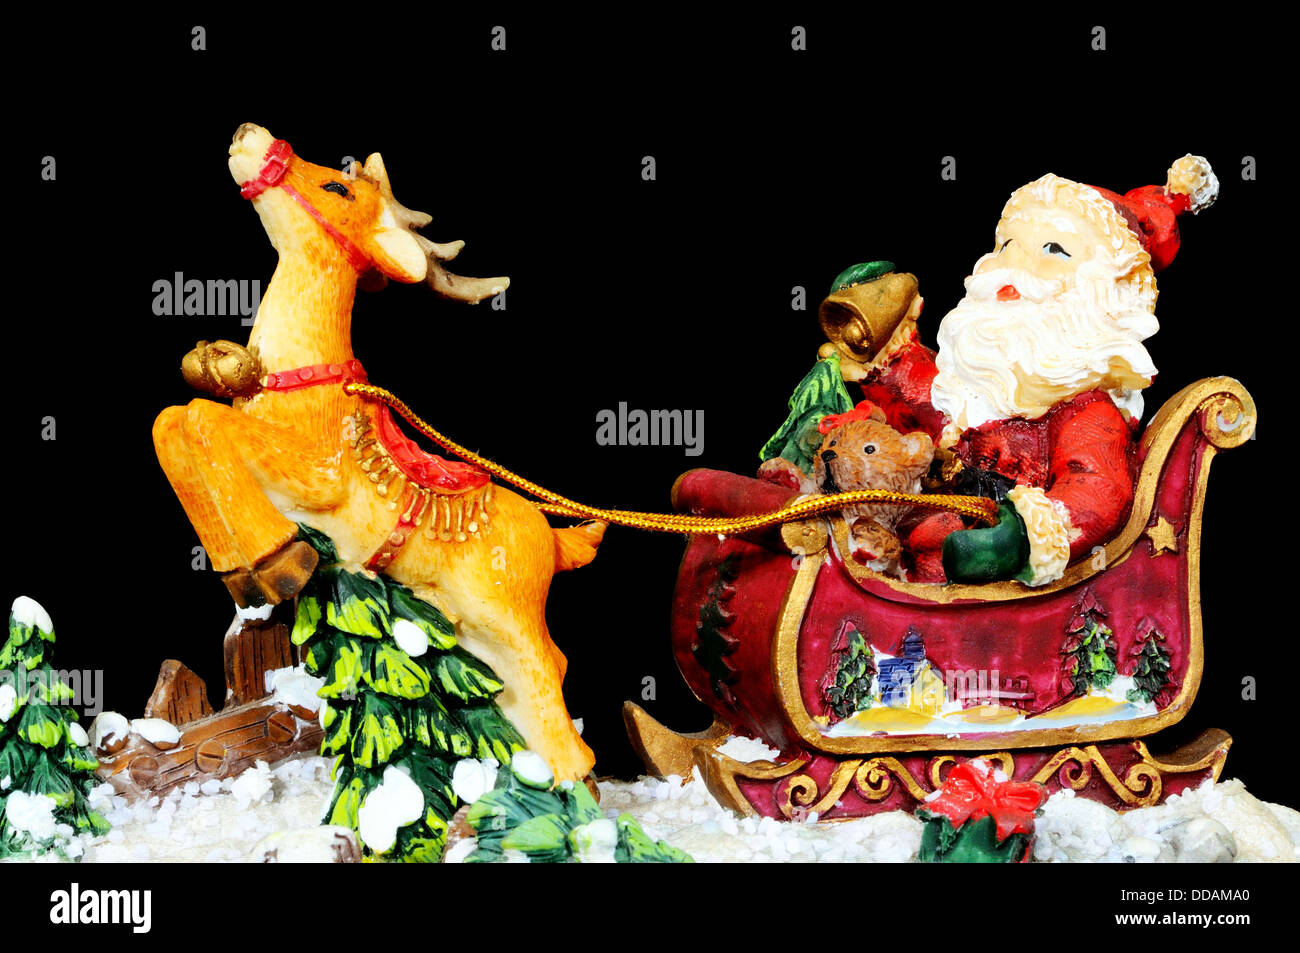 Ceramic Father Christmas in his sleigh with reindeer on a black background. Stock Photo